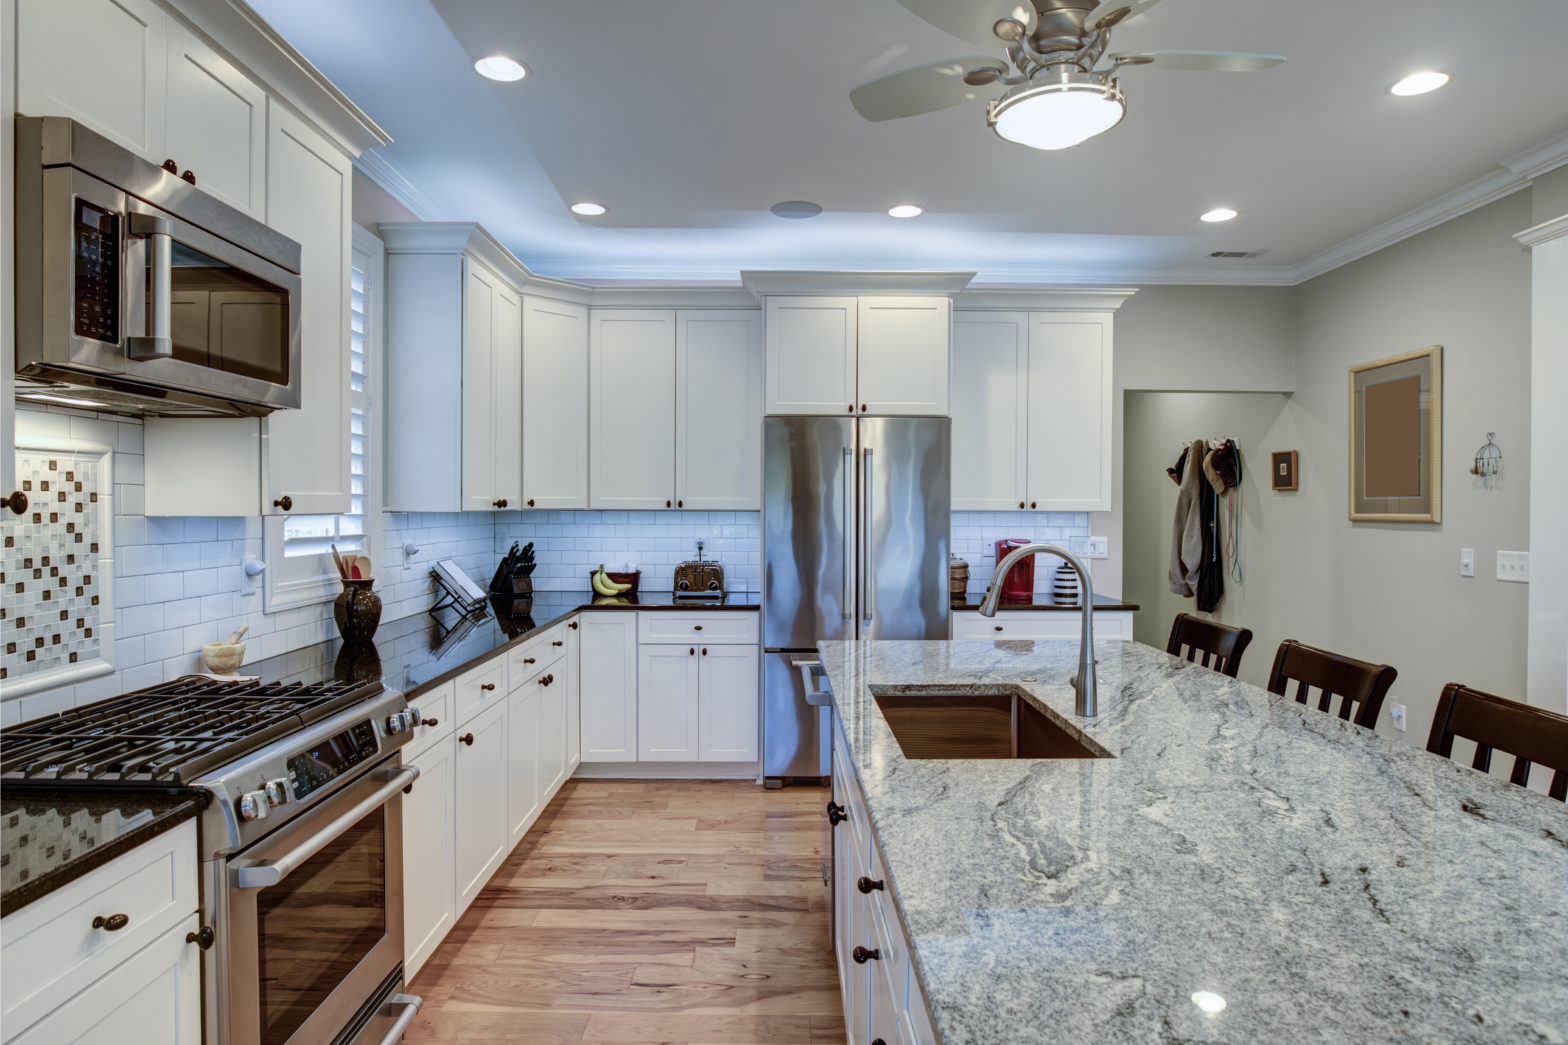 We Can Complete Your Kitchen Remodeling Project in Portland, Oregon, West Linn, Lake Oswego, and the Surrounding Areas.